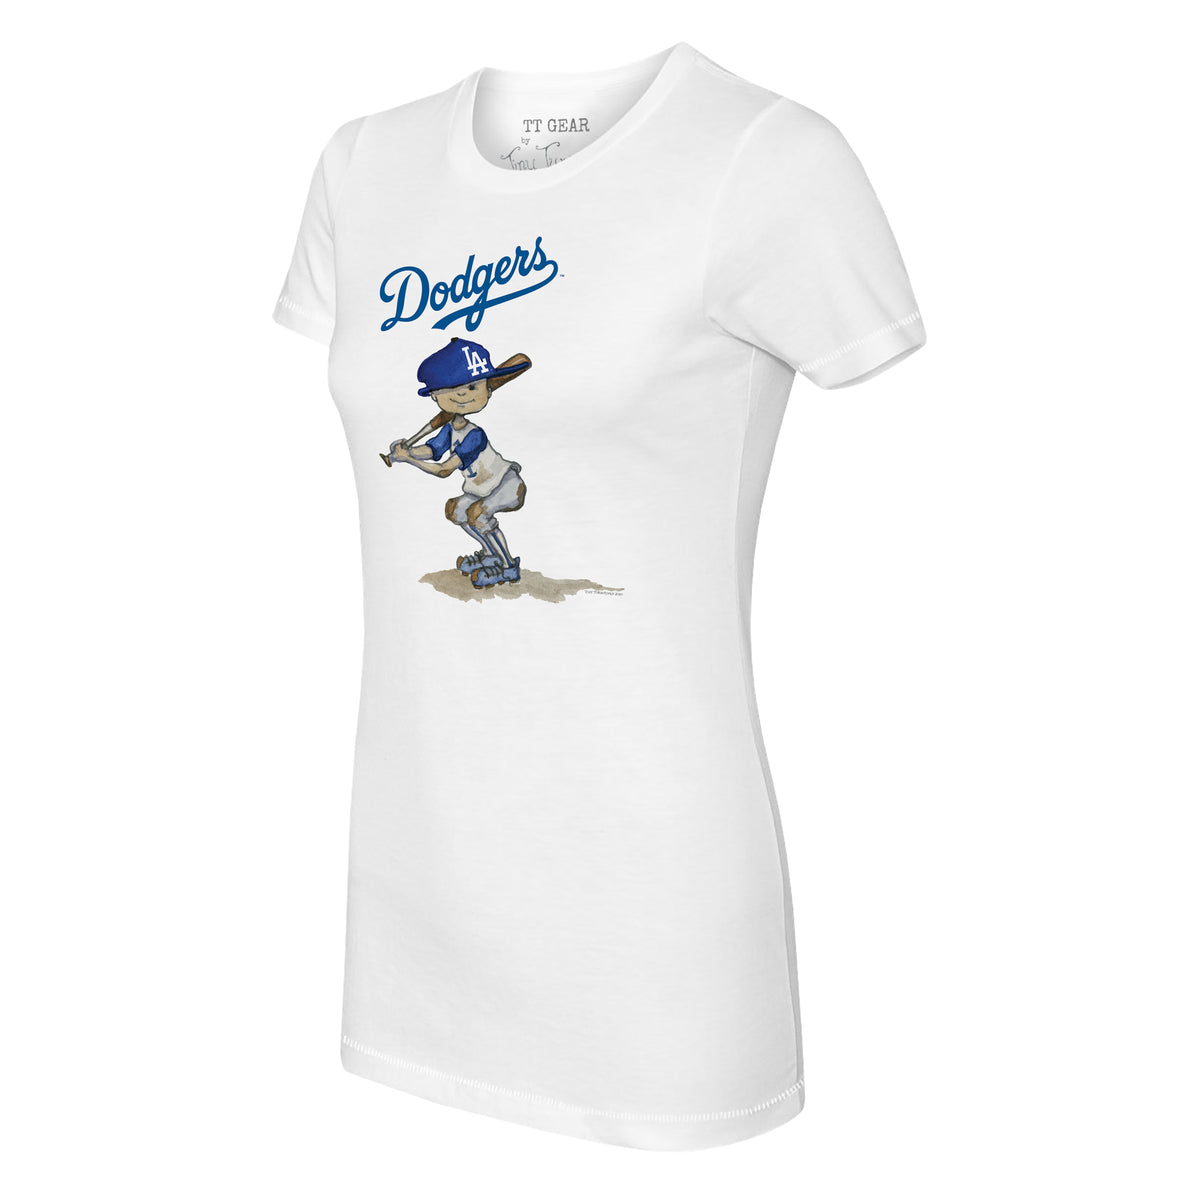 Los Angeles Dodgers Babes Tee Shirt